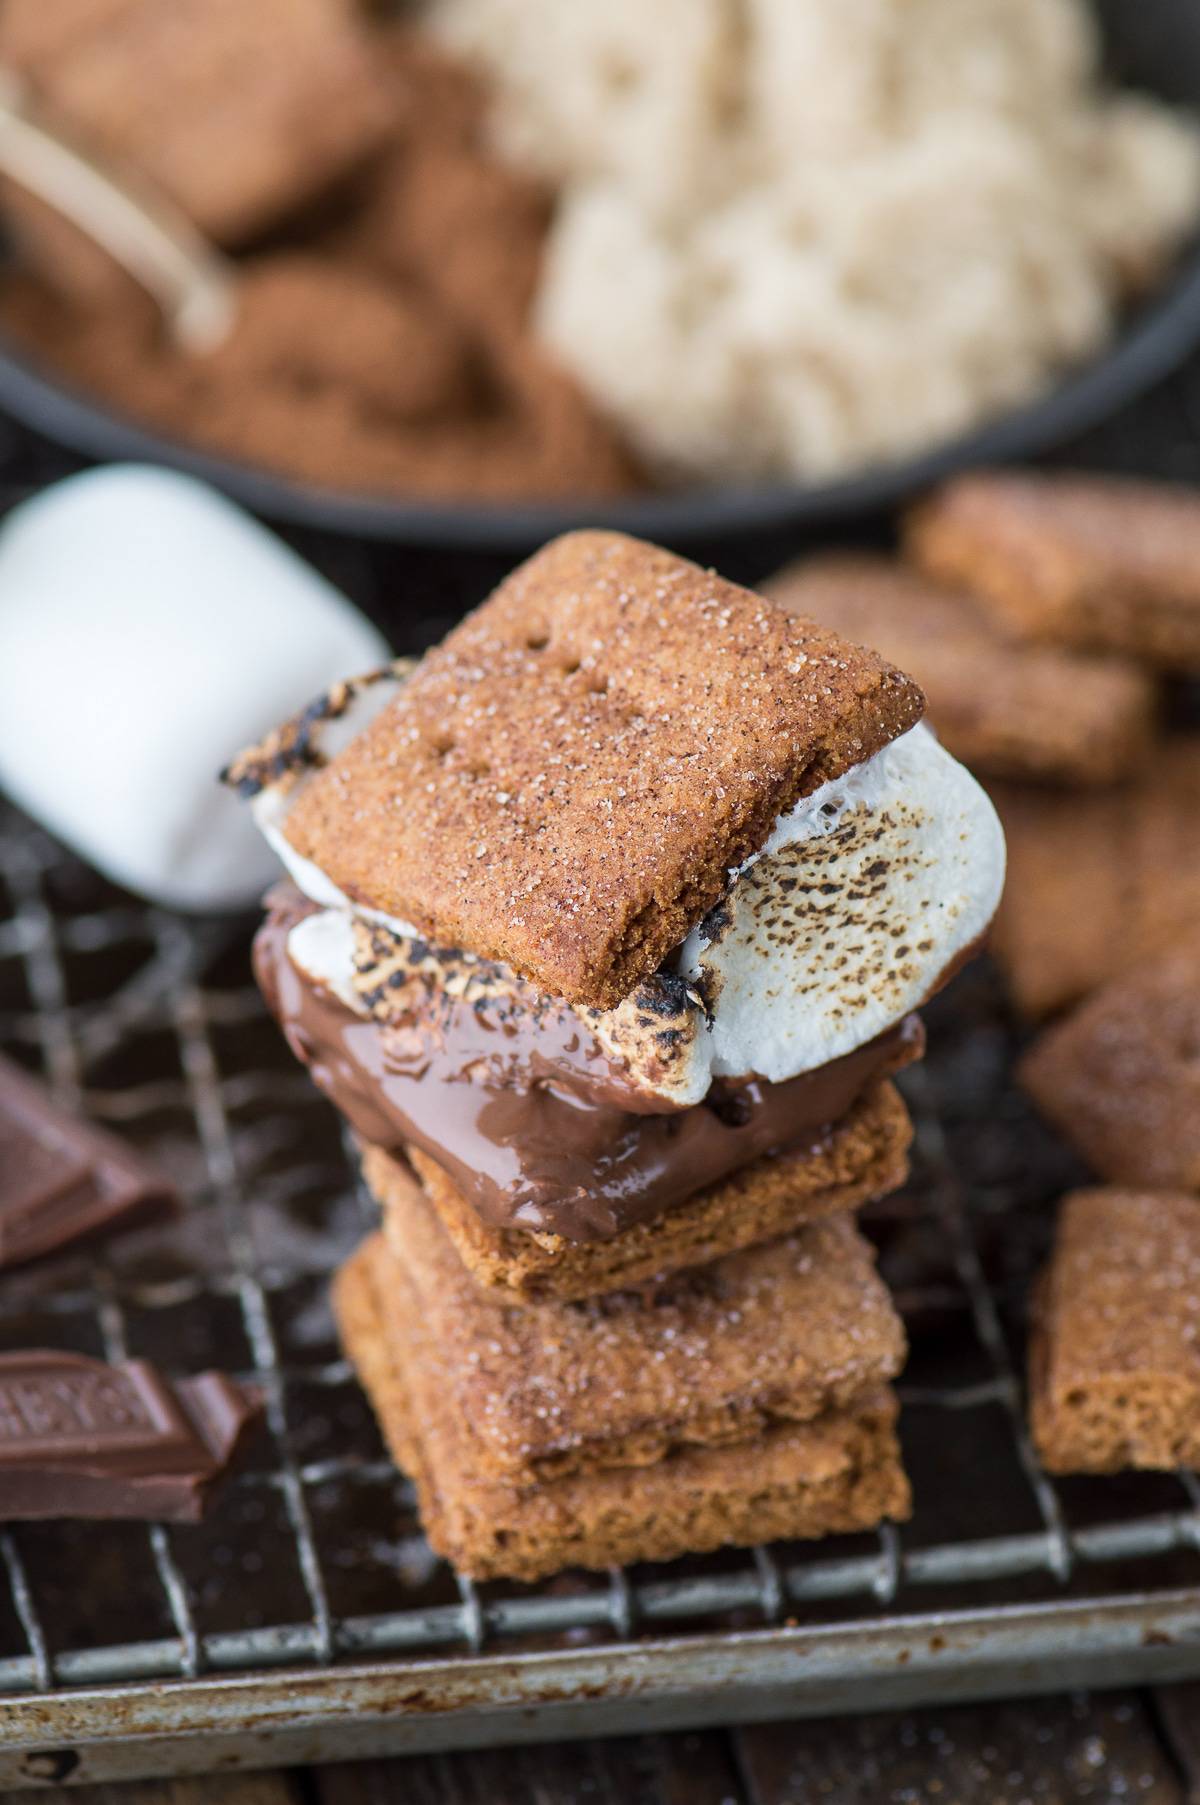 Homemade brown sugar cinnamon graham crackers that are packed with flavor and give store bought grahams a run for their money! Easily make these gluten free with GF all purpose flour!